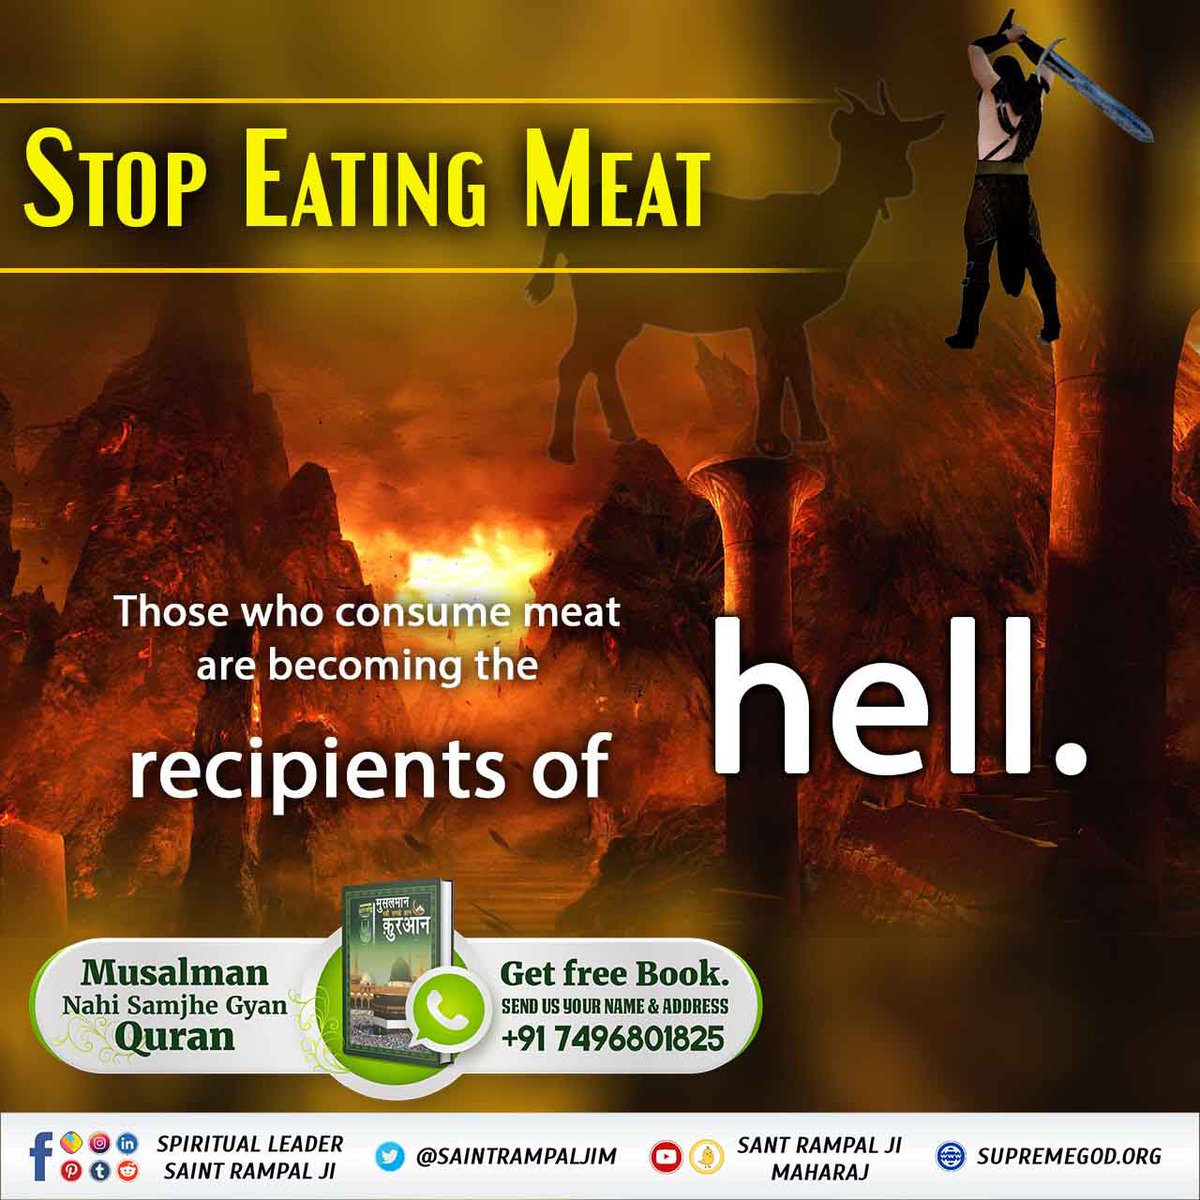 #ProphetMuhammad_NeverAteMeat
Hazrat Muhammad never ate meat of cow or any other animal. So Muslims should also leave habit of eating animals.🐄🐂🐐
Allah Kabir